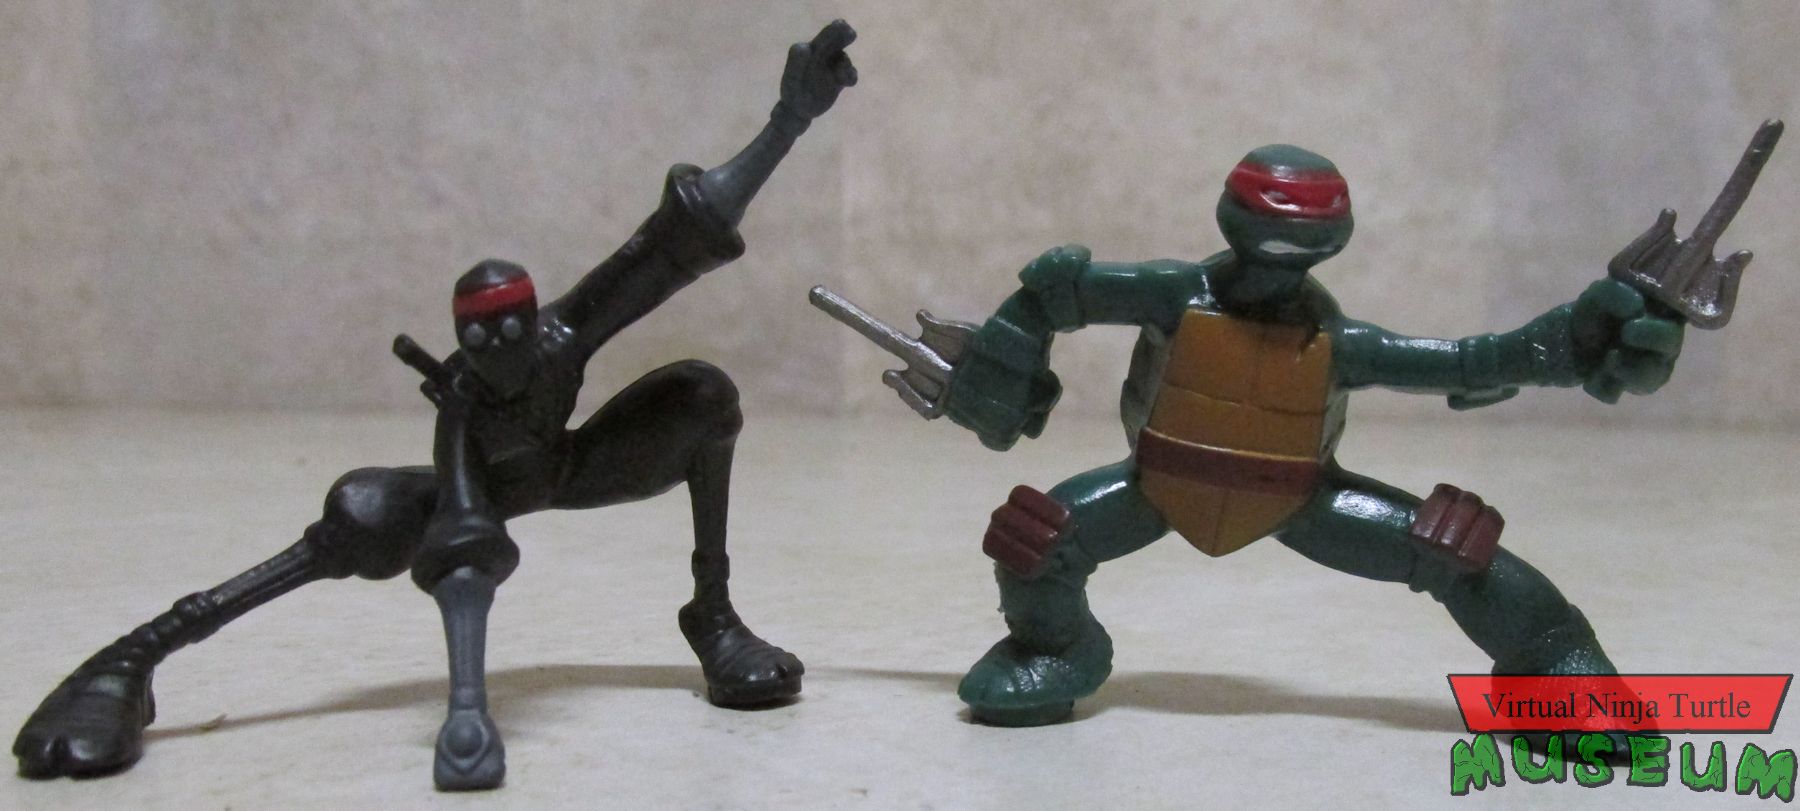 Figurine Two Packs Raphael and Foot Soldier